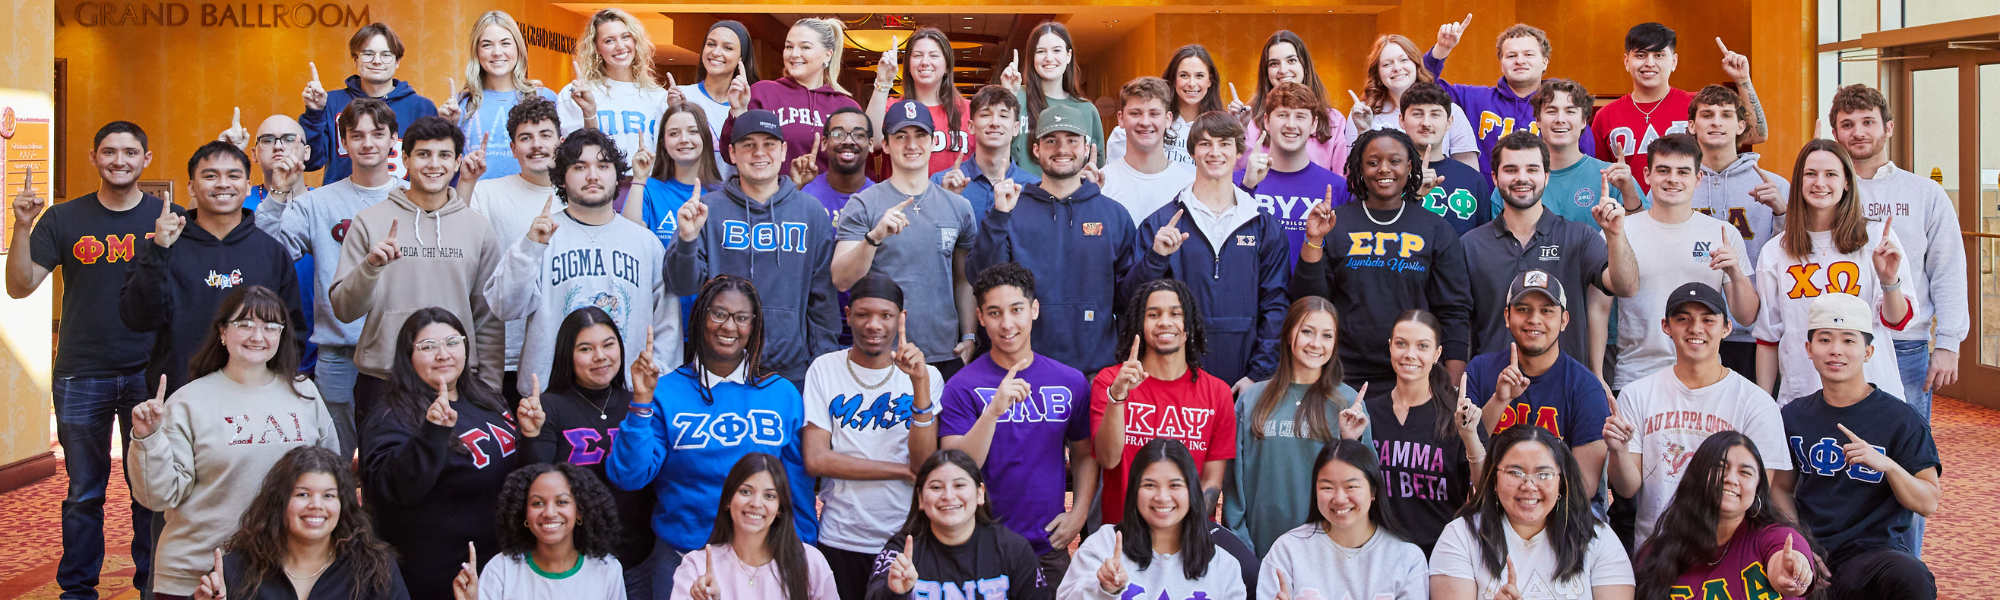 Fraternity and sorority members posing for a group photo at the FSPS leadership retreat.